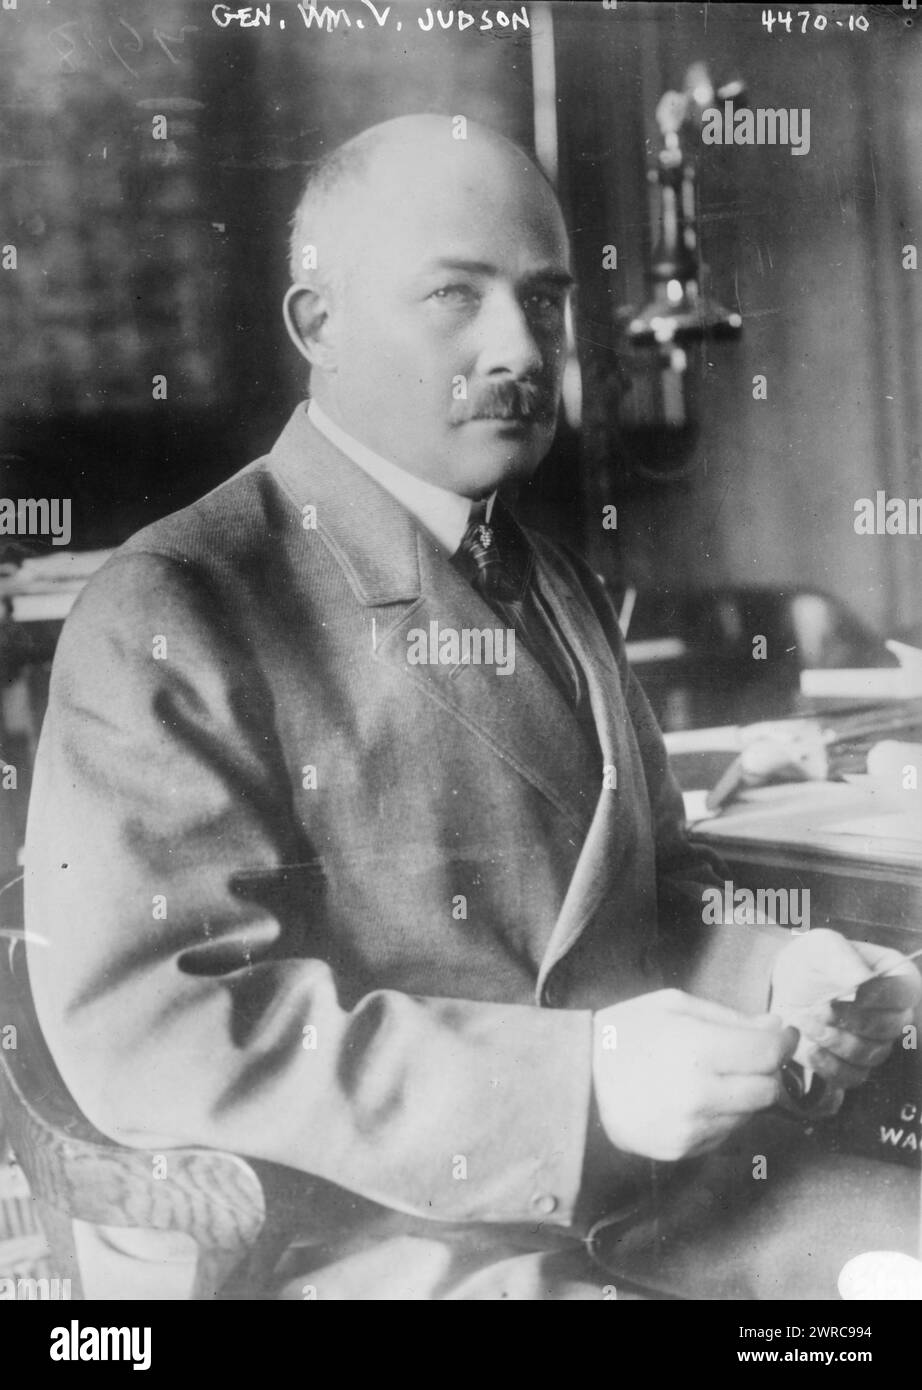 Gen. Wm. V. Judson, Photograph shows General William Voorhees Judson (1865-1923) who served as chief of the American military mission in Petrograd., 1918 Feb. 1918, Glass negatives, 1 negative: glass Stock Photo